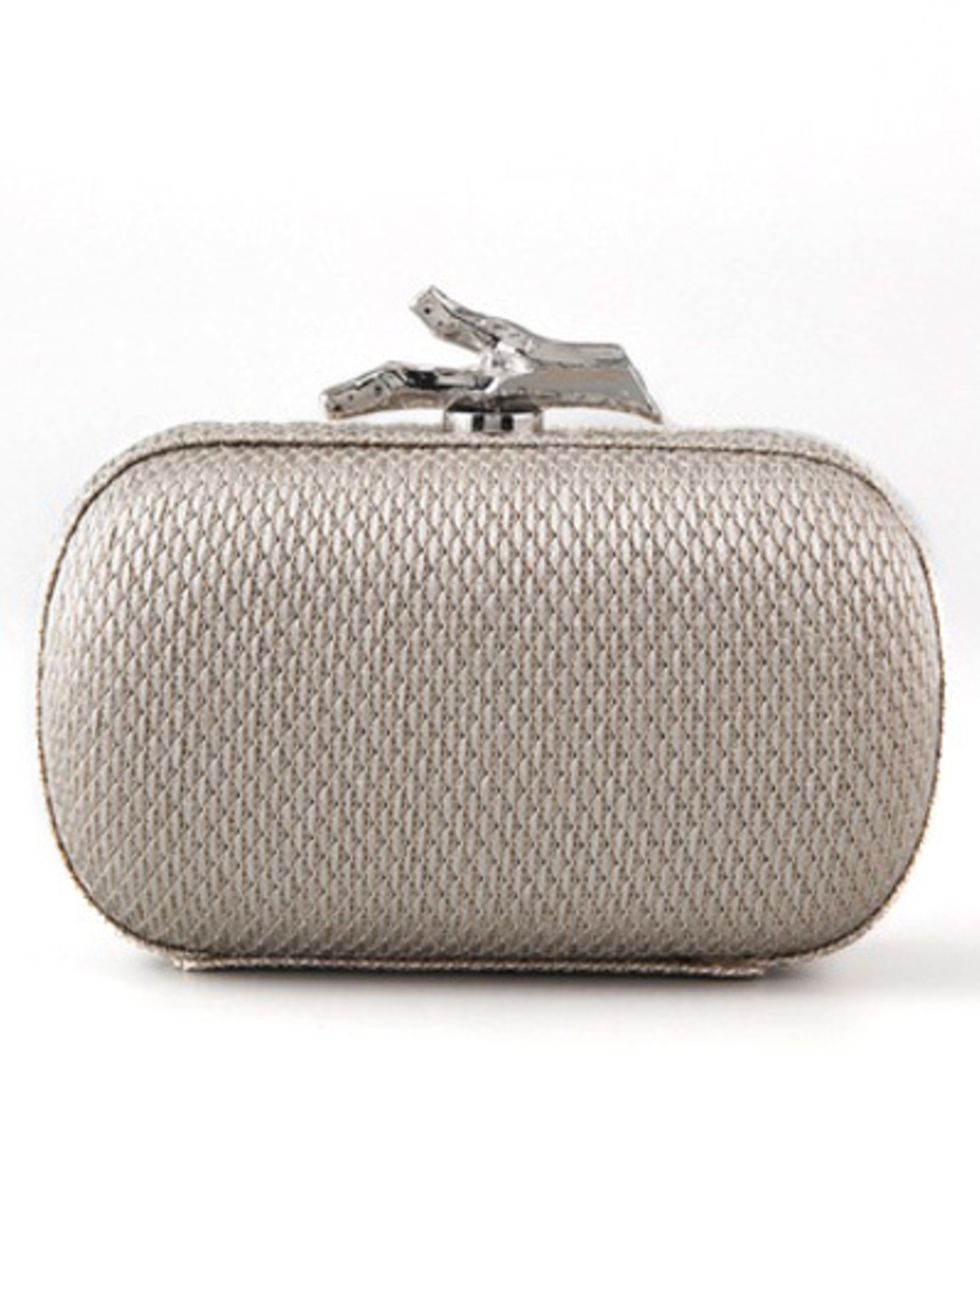 Luggage and bags, Grey, Baggage, Beige, Material property, Bag, Suitcase, Silver, Coin purse, 